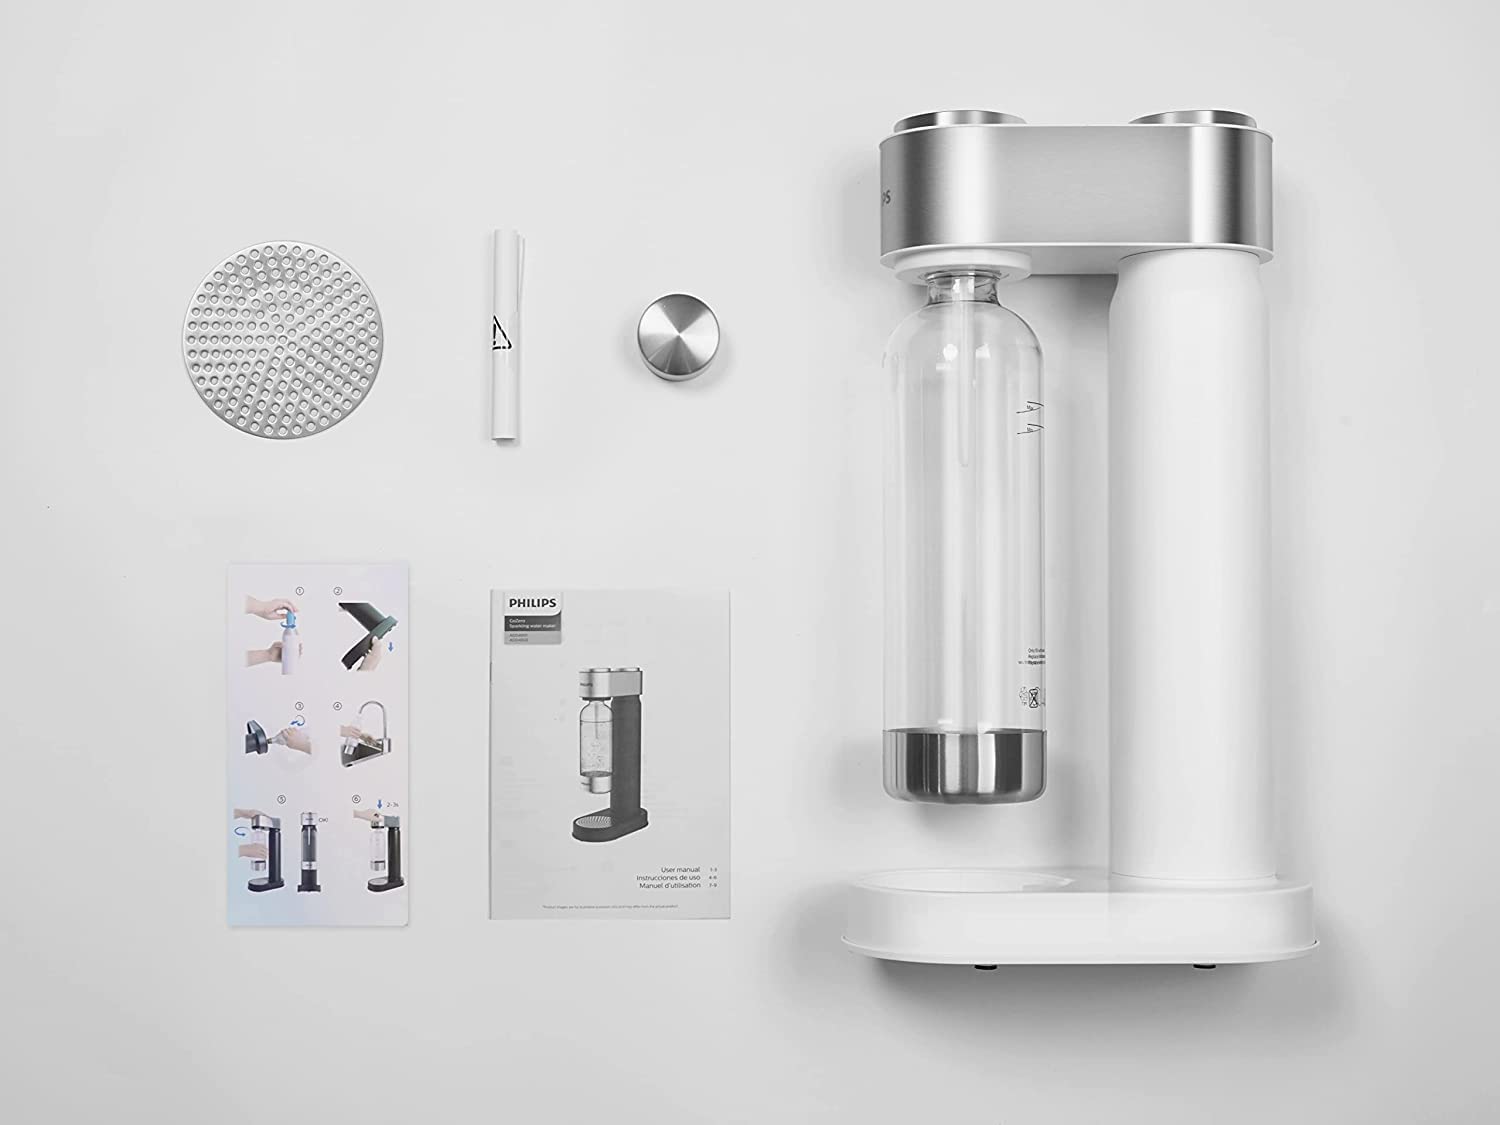 PHILIPS Stainless Sparkling Water Maker Soda Maker Machine for Home Carbonating with BPA free PET 1L Carbonating Bottle, Compatible with Any Screw-in 60L CO2 Exchange Carbonator(NOT Included), White